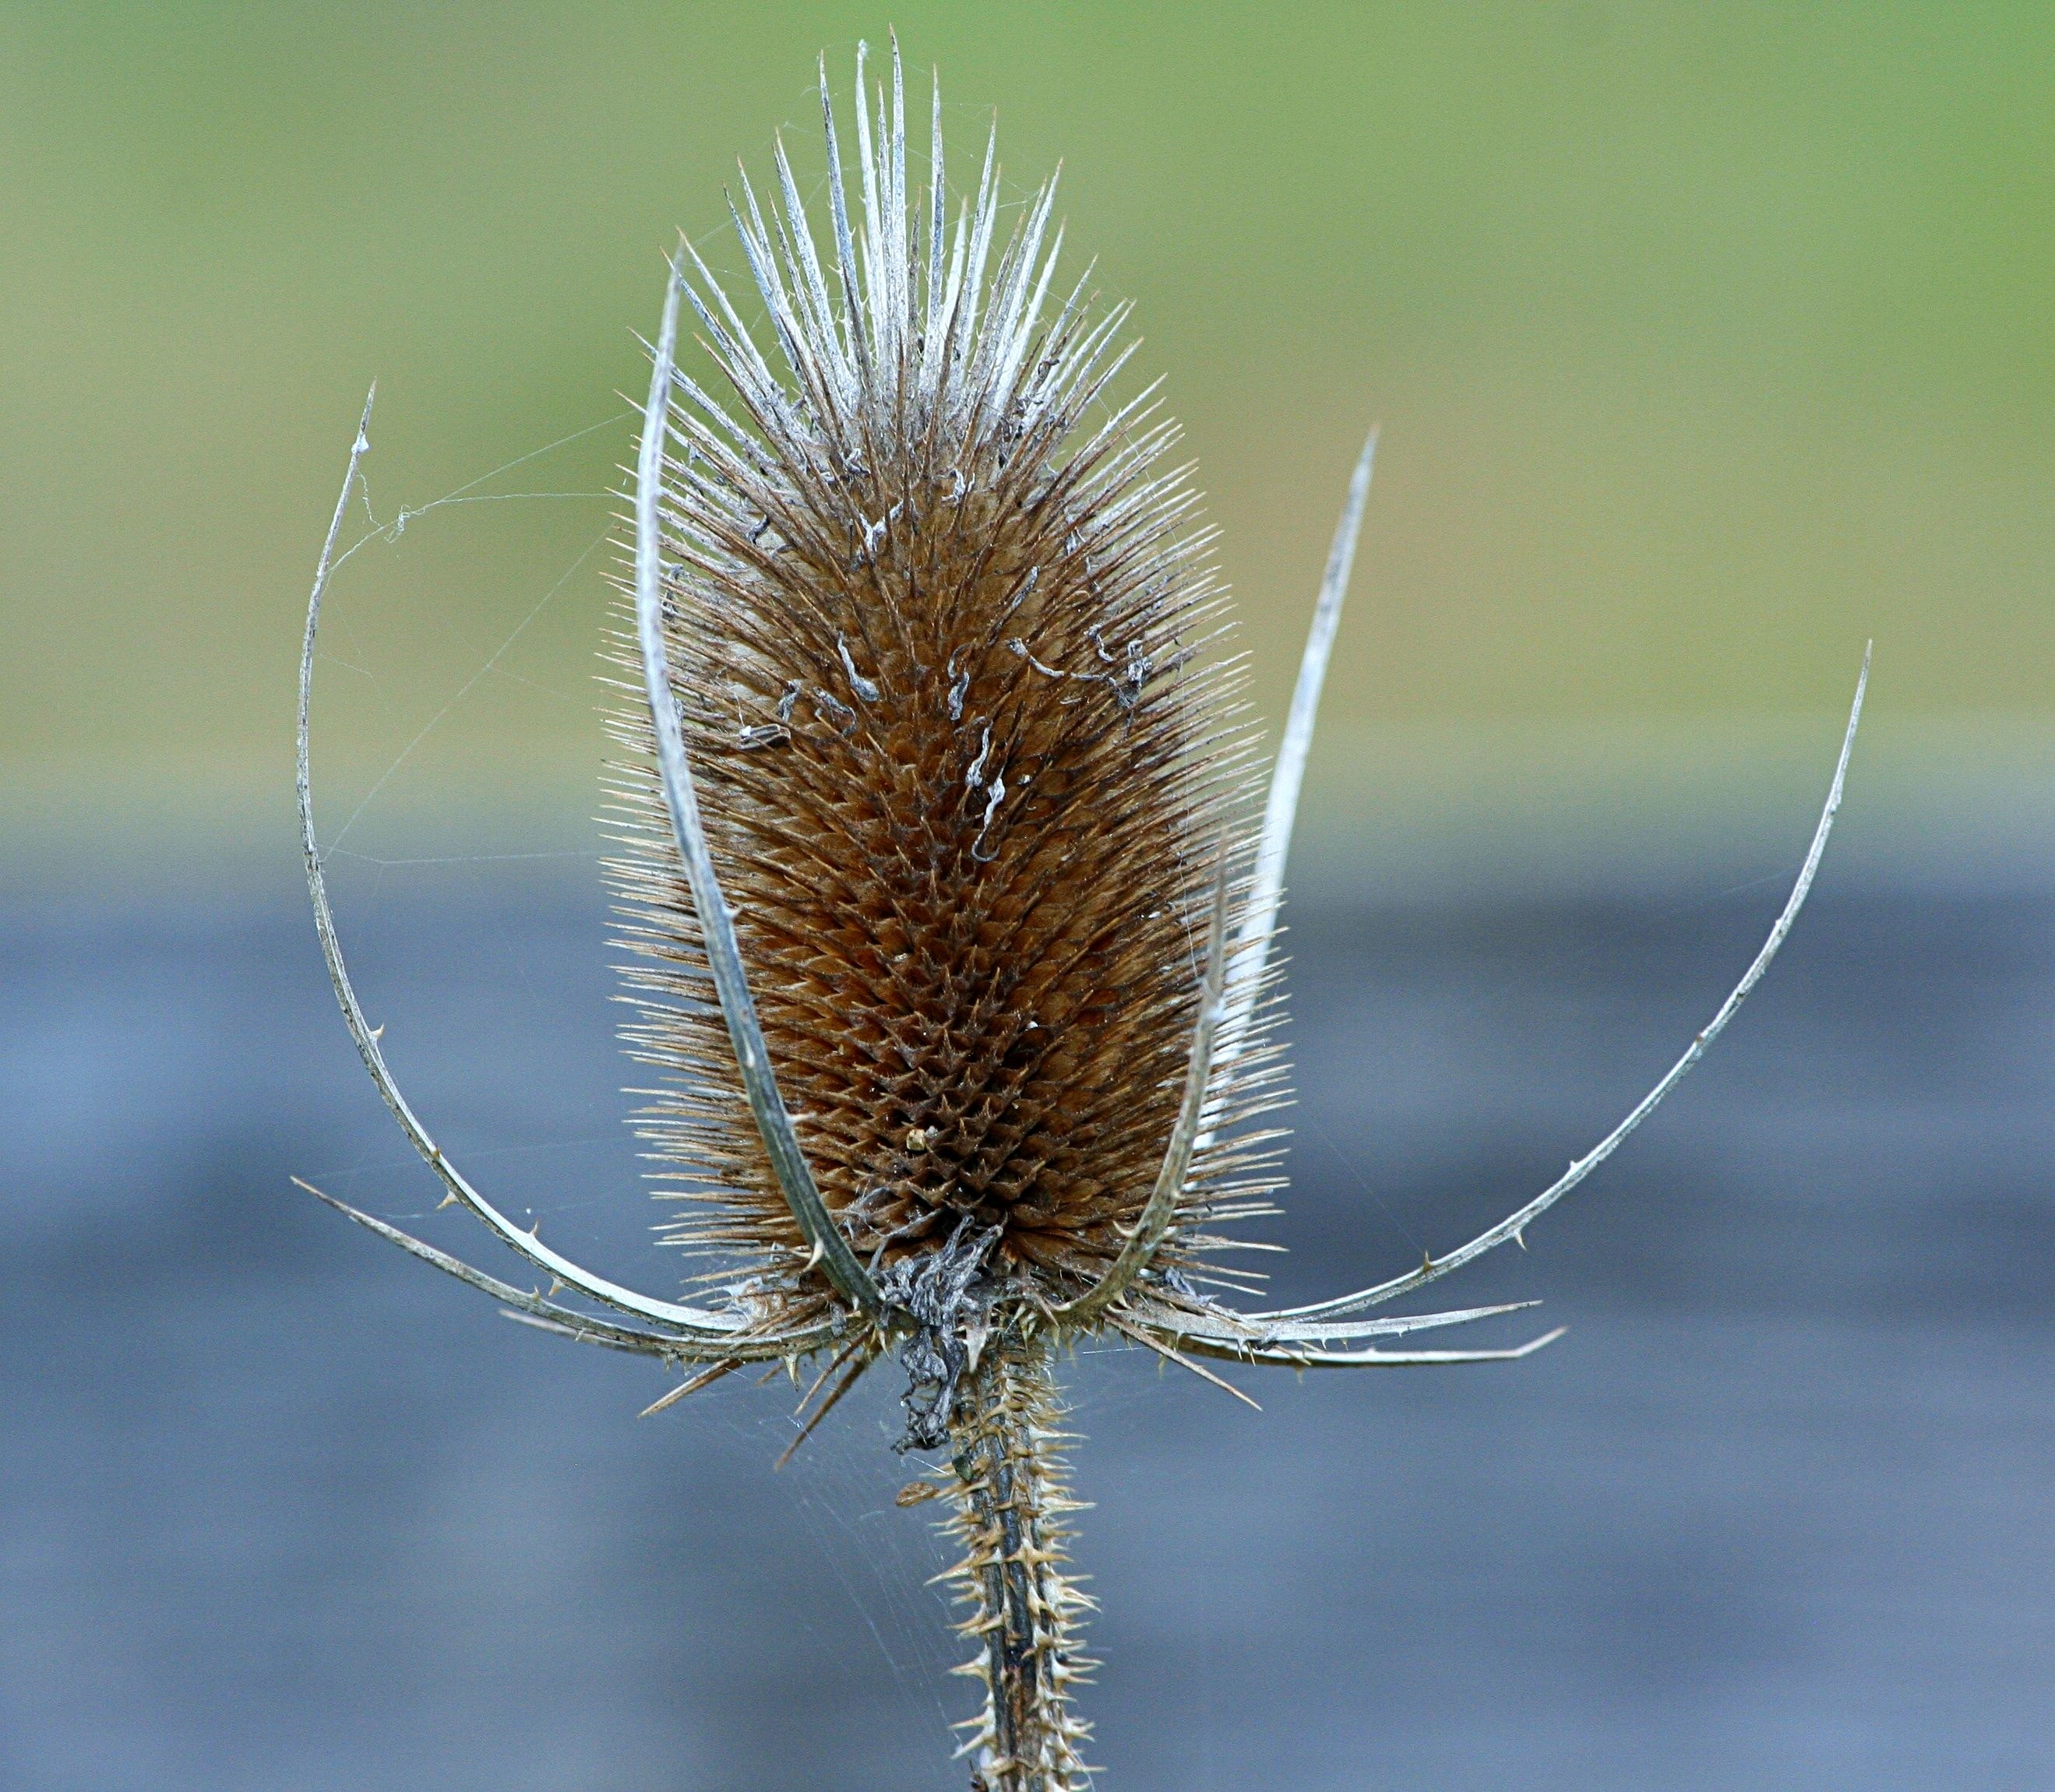 Teasel, Prickly, Dipsacus, Teazel, one animal, insect